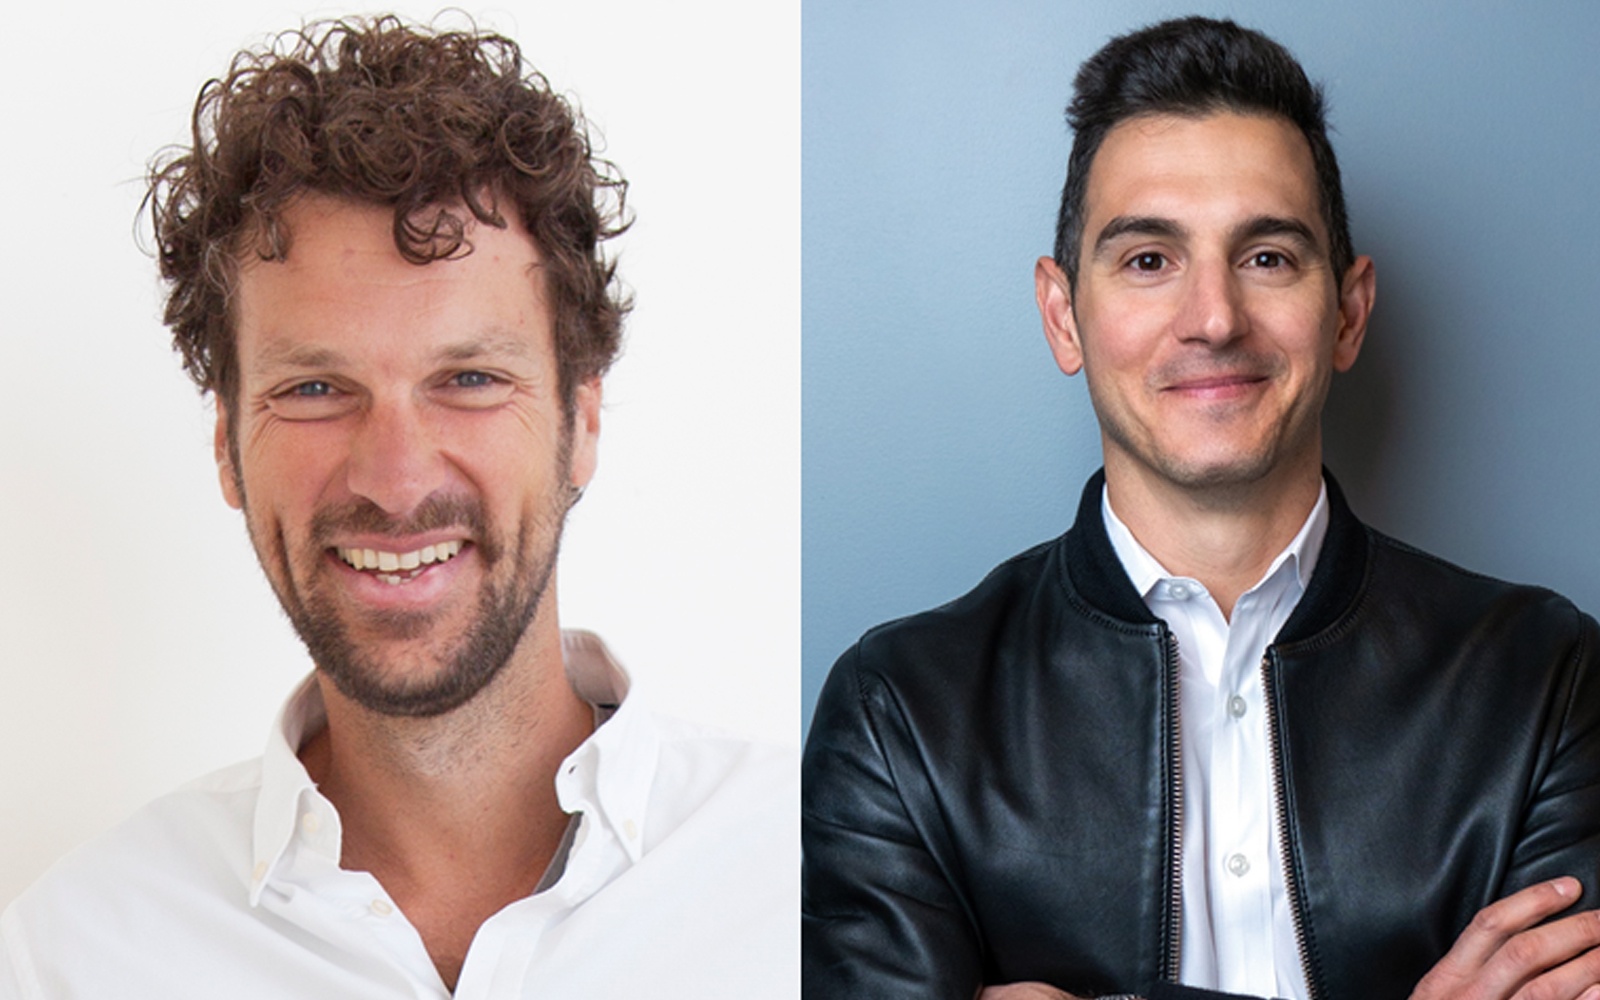 OMG CEO Florian Adamski and OMD CEO George Manas Detail What’s Next for OMG